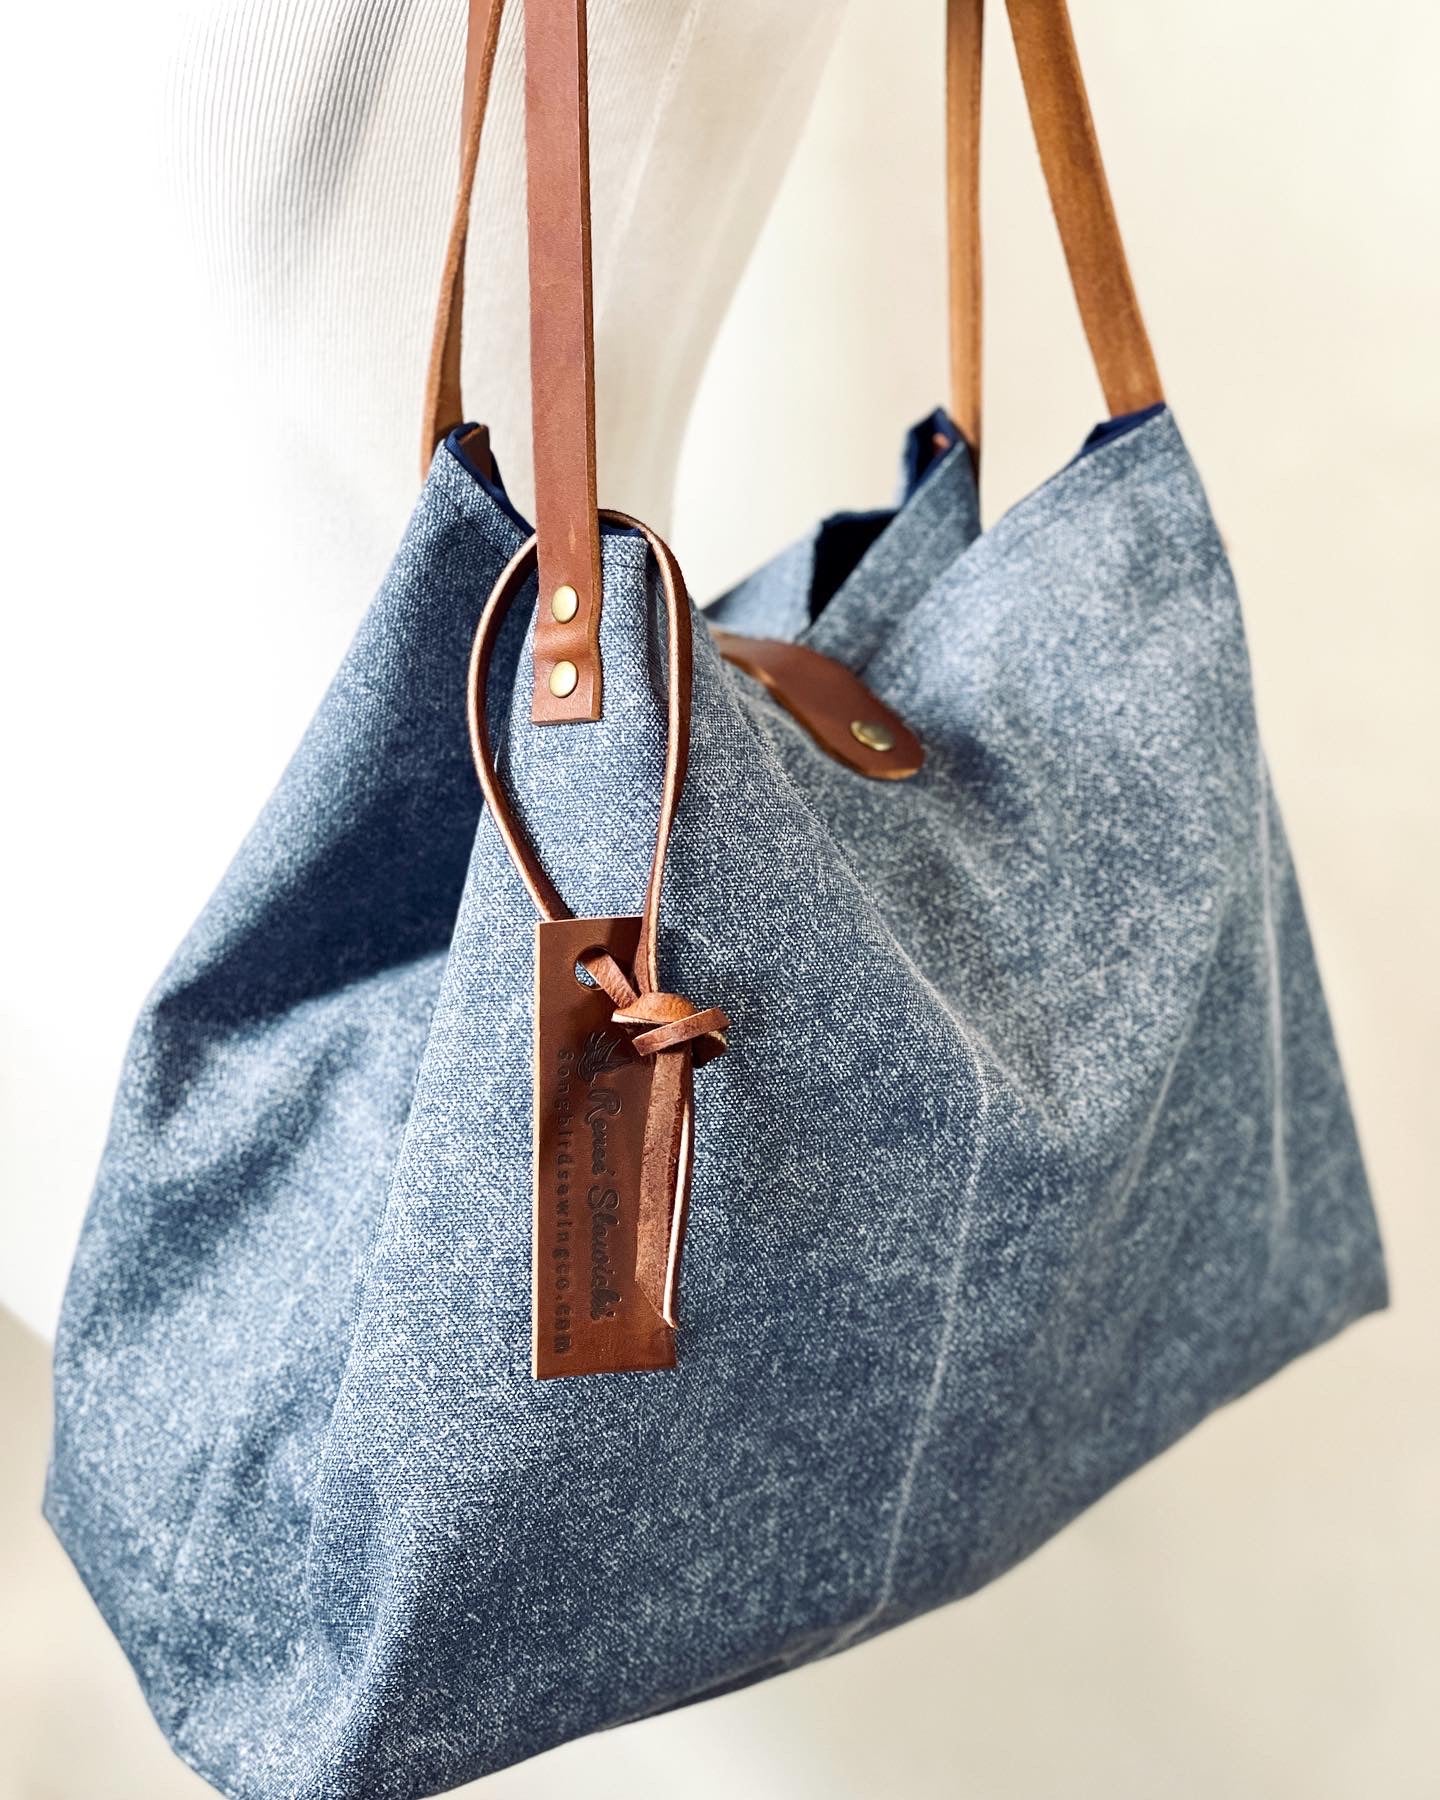 Stone Washed Denim Carry all Tote